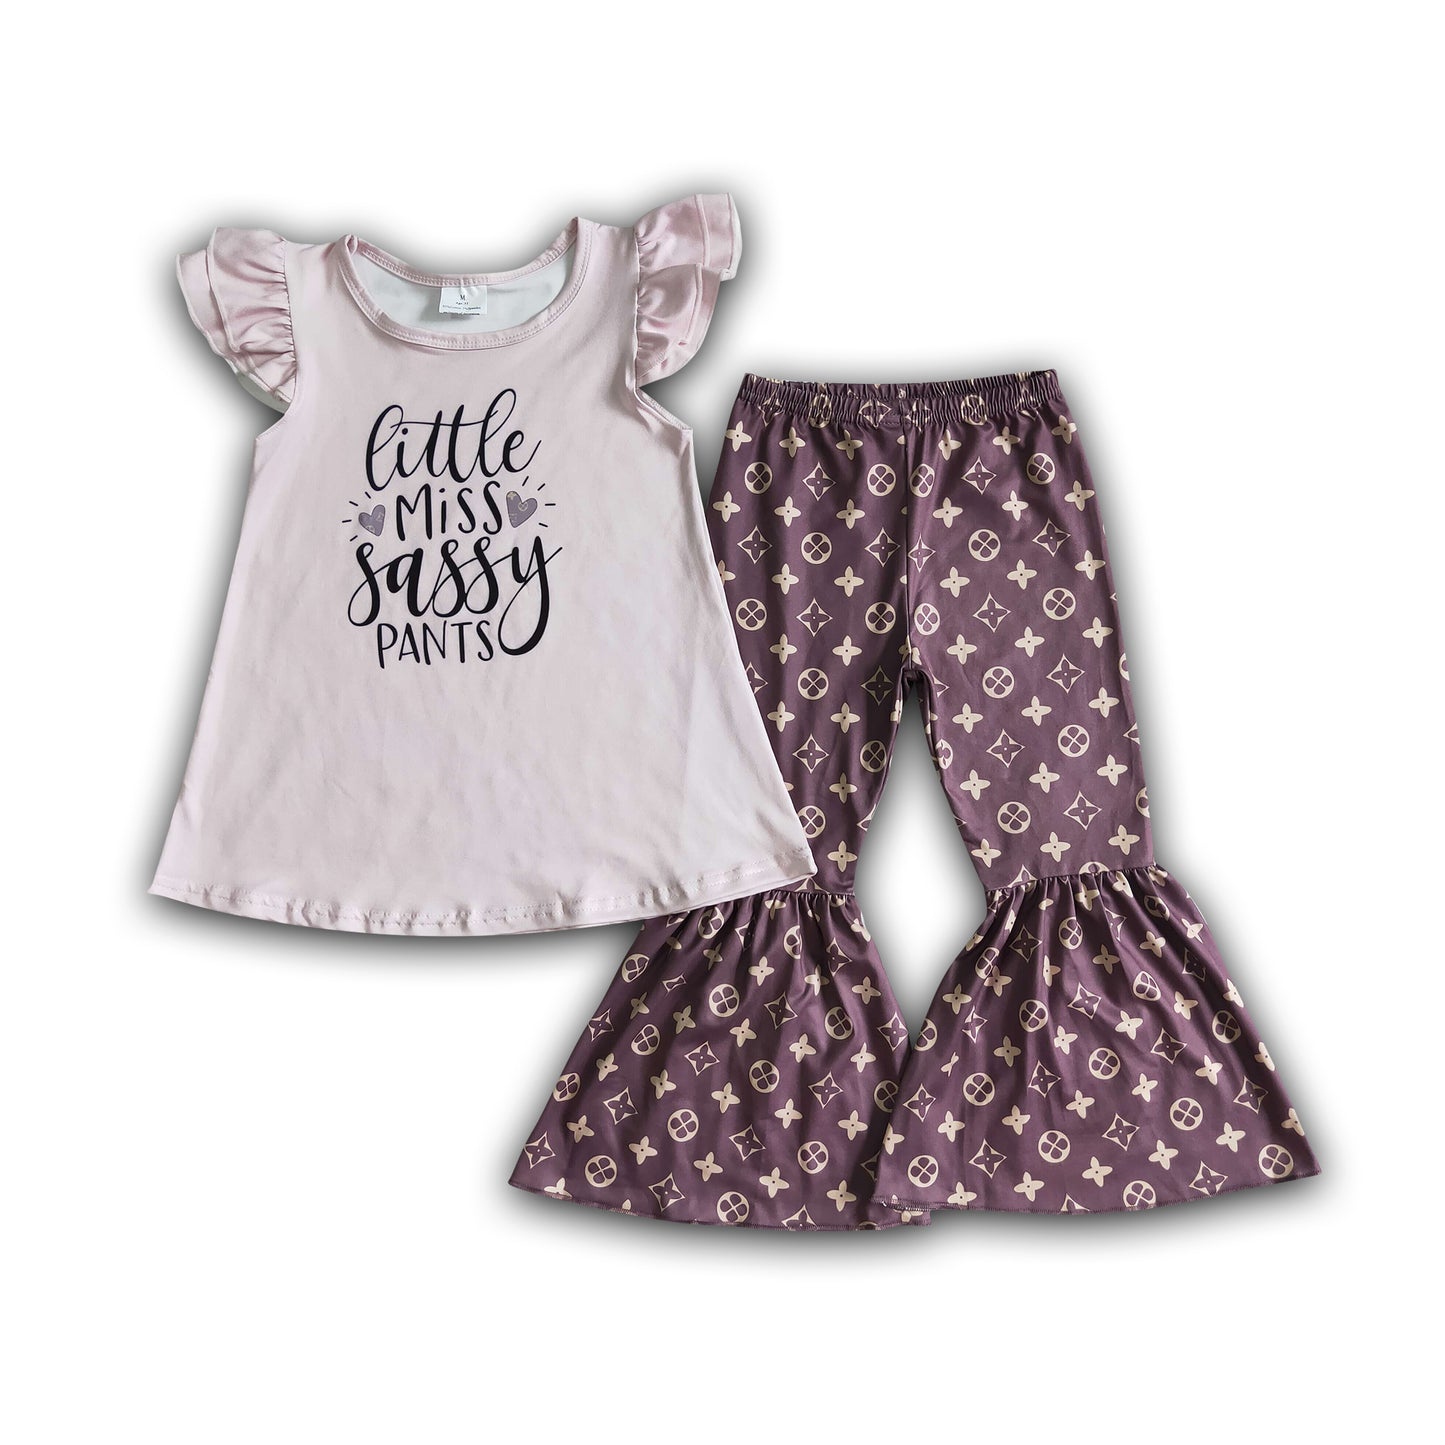 Little miss sassy pants girls outfits